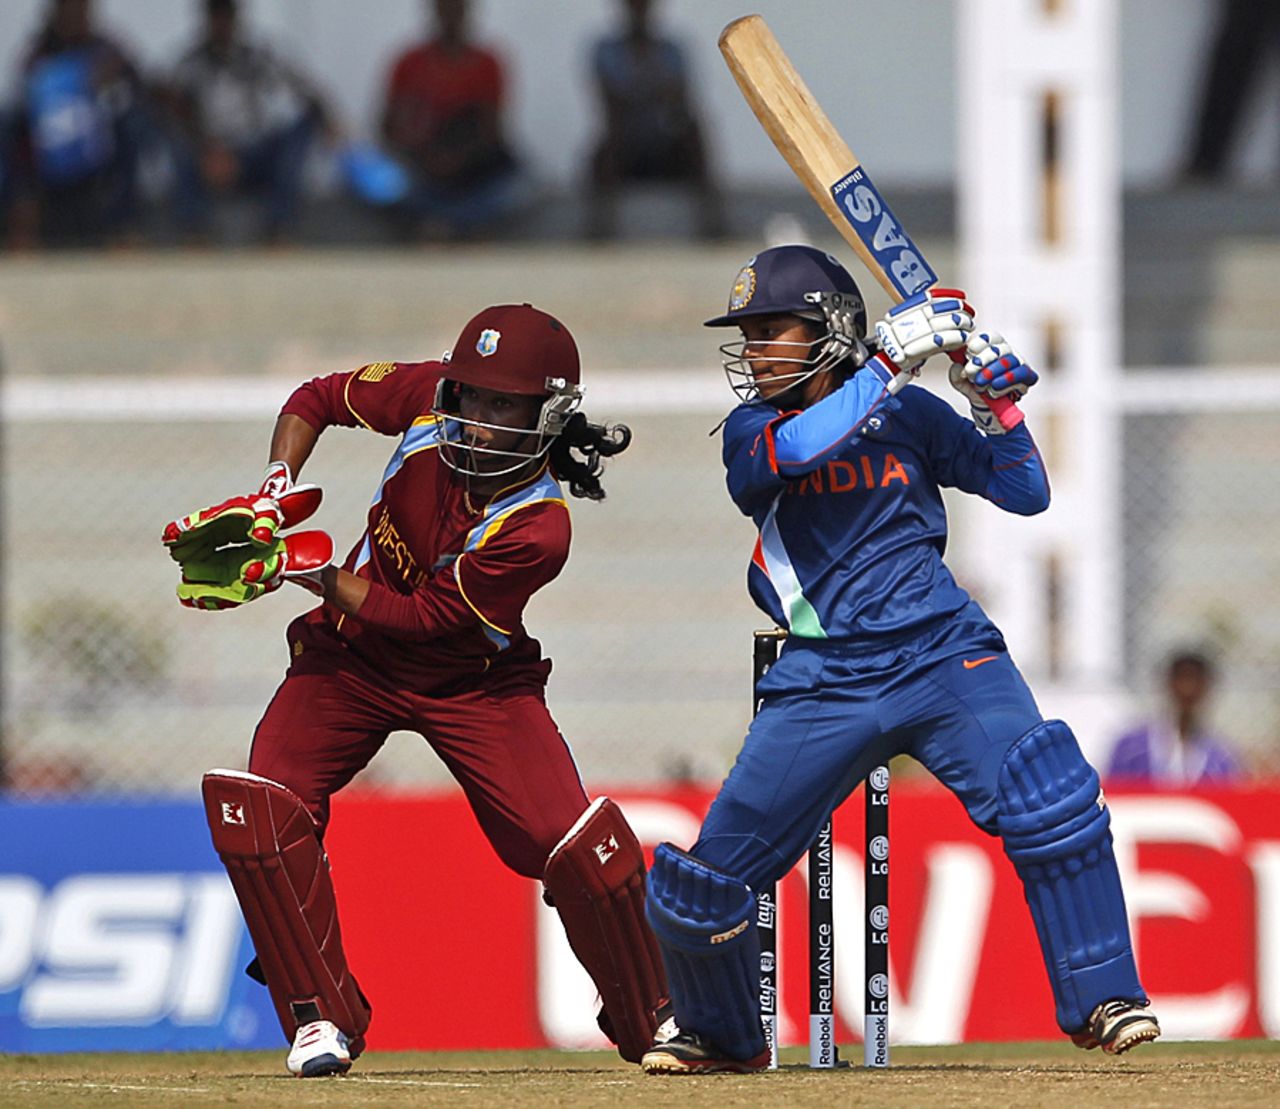 Poonam Raut cuts on her way to 72, India v West Indies, Women's World Cup 2013, Group A, Mumbai, January 31, 2013